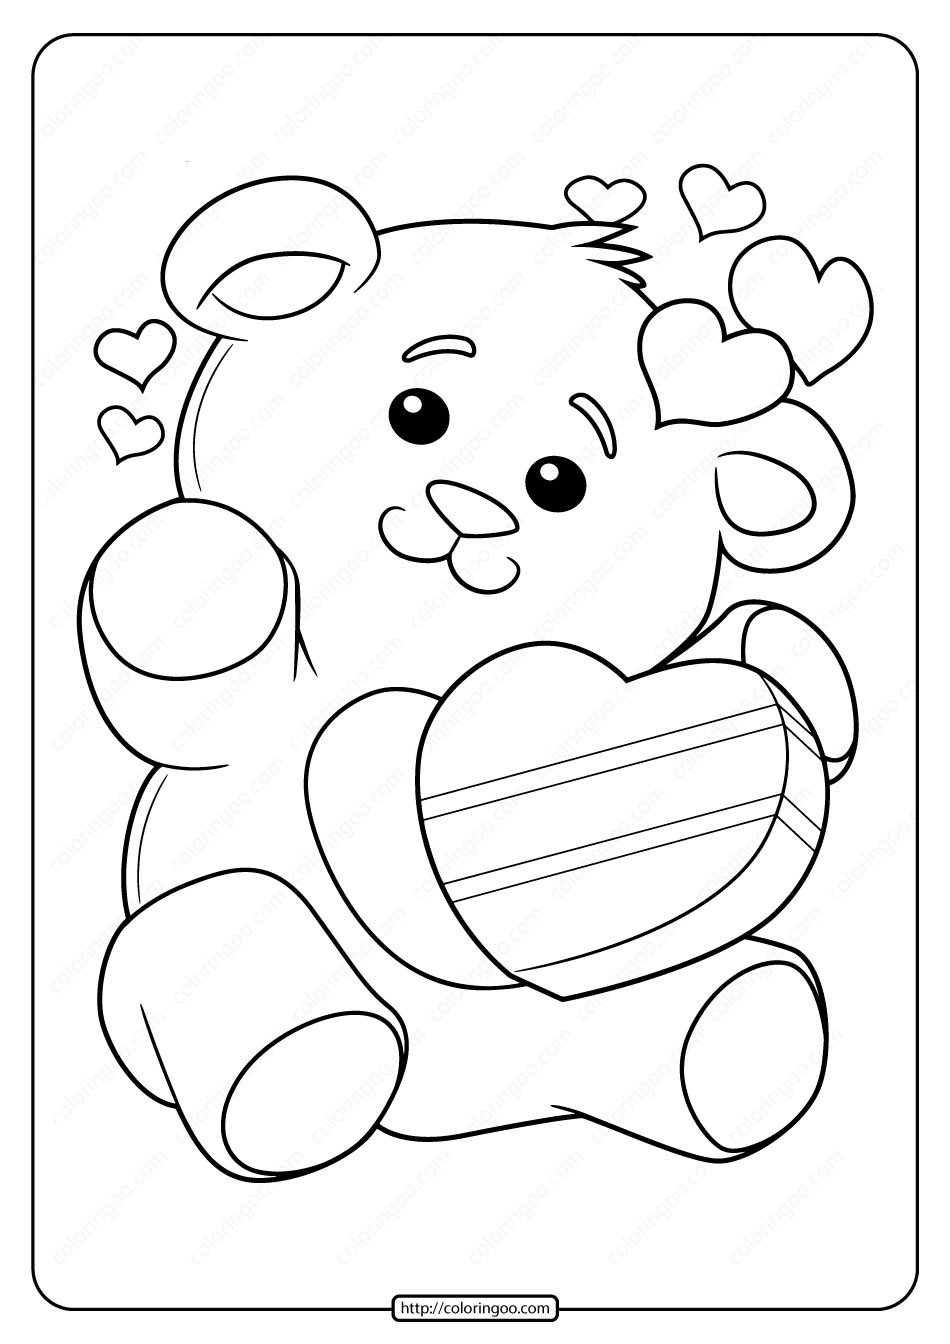 Free Printable Valentine’s Day Bear Pdf Coloring Page